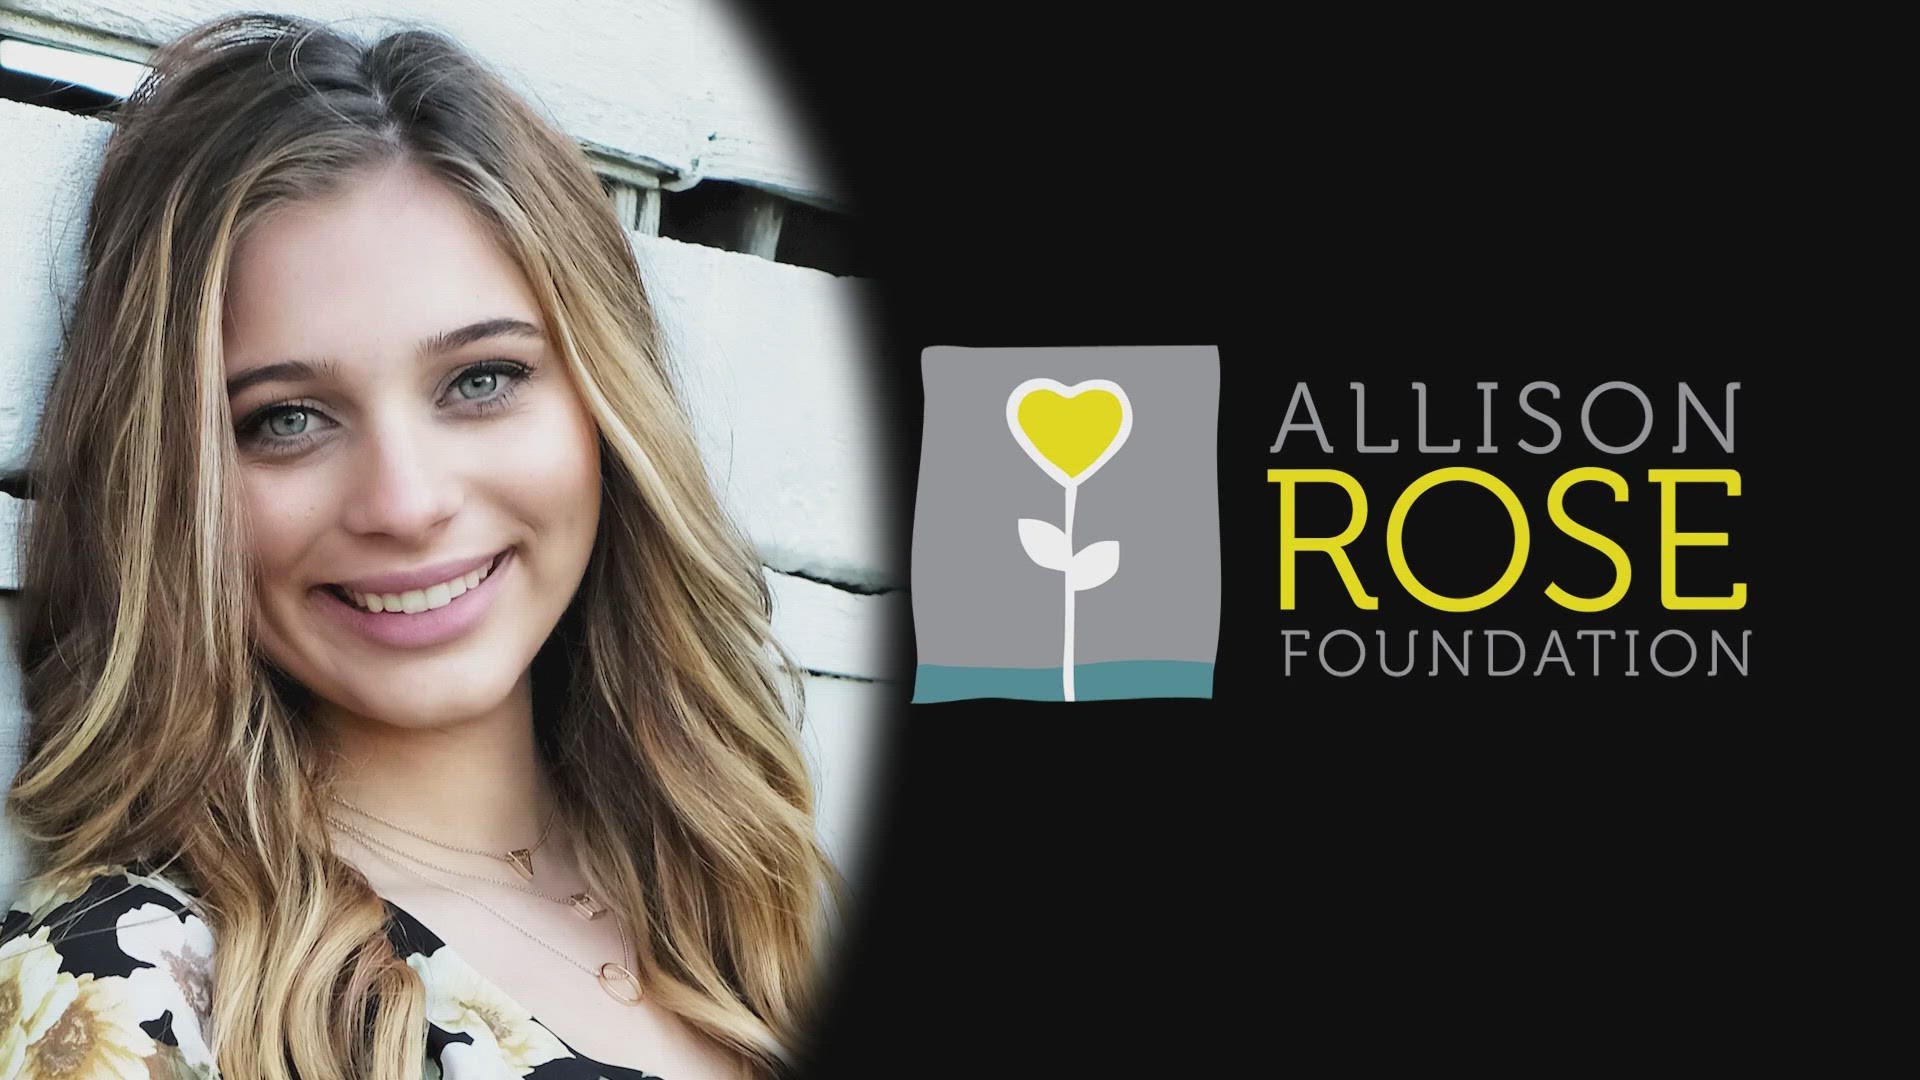 The Suhy family knew they wanted to honor their daughter, Ally, while at the same time helping prevent other families from suffering the same heartbreak .